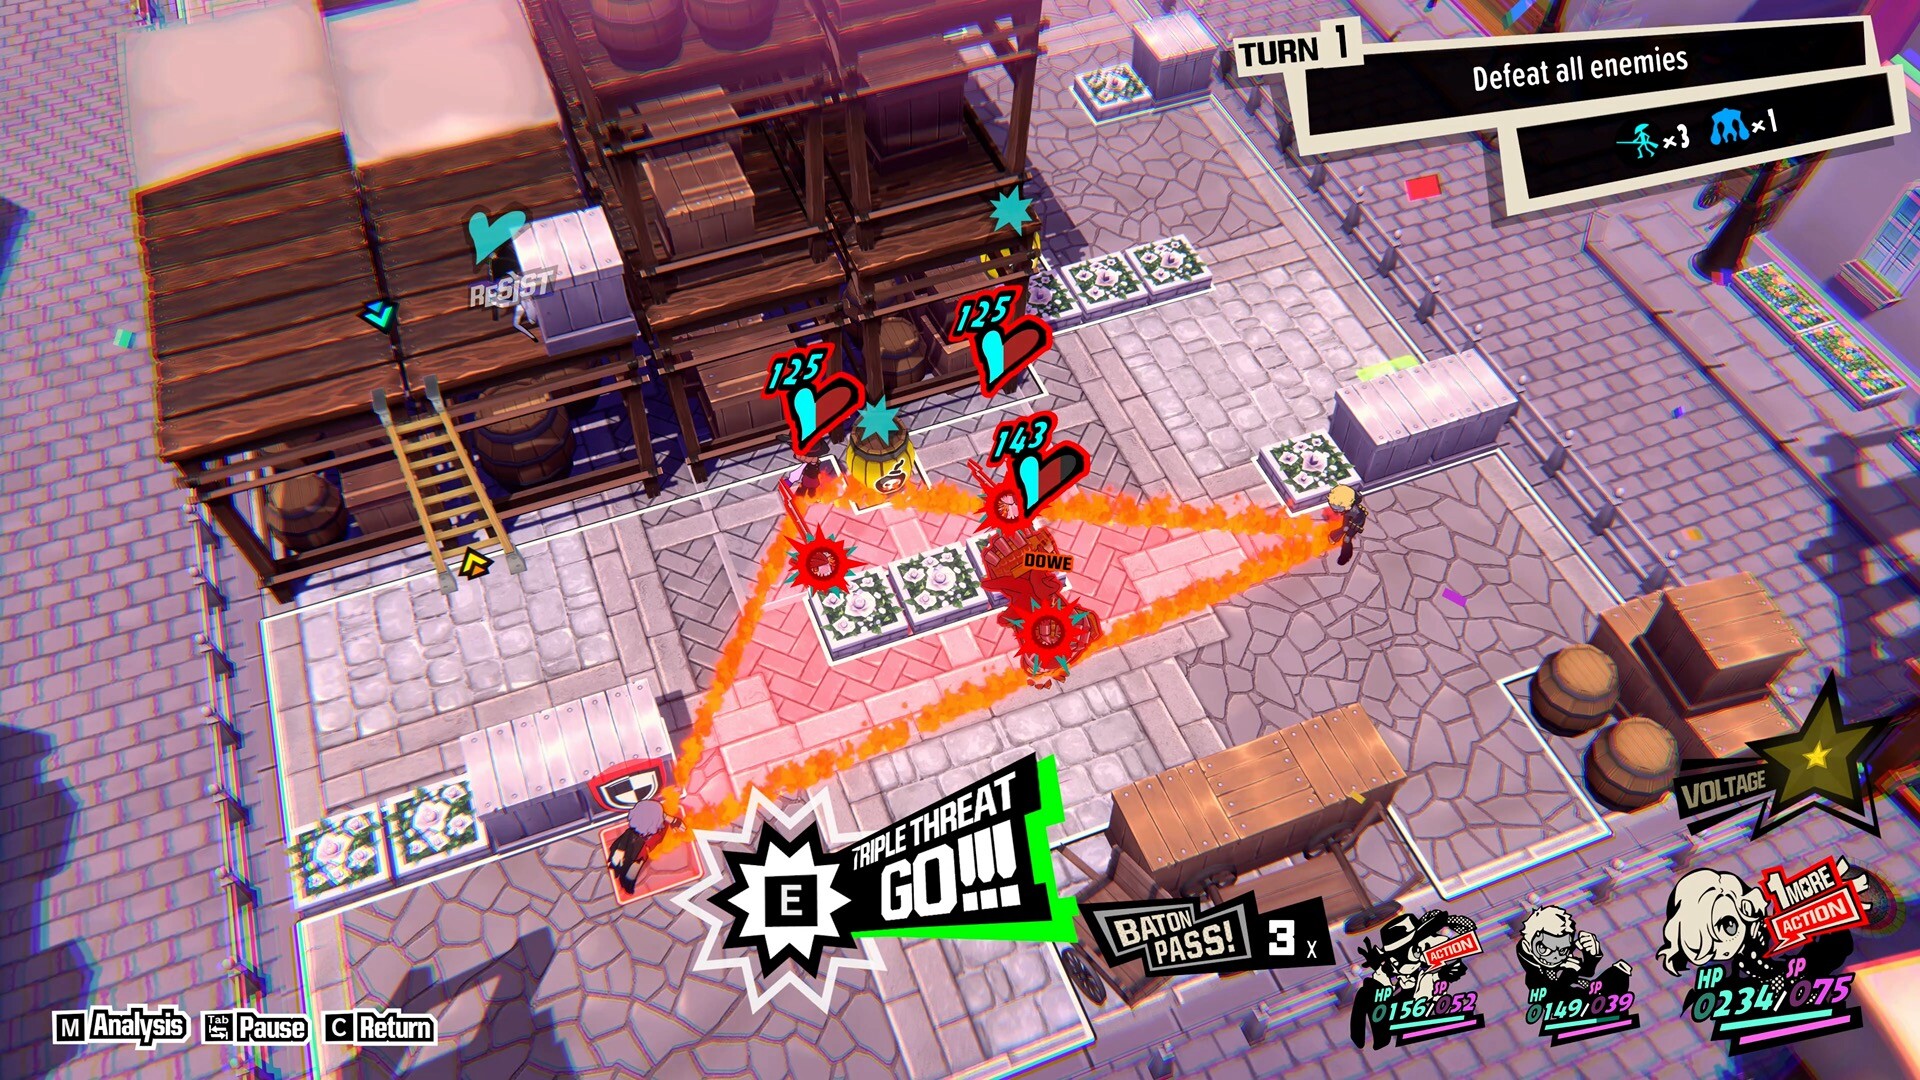 Persona 5 Tactica Unveils Gameplay Systems, Skill Trees, and Conversations  - QooApp News